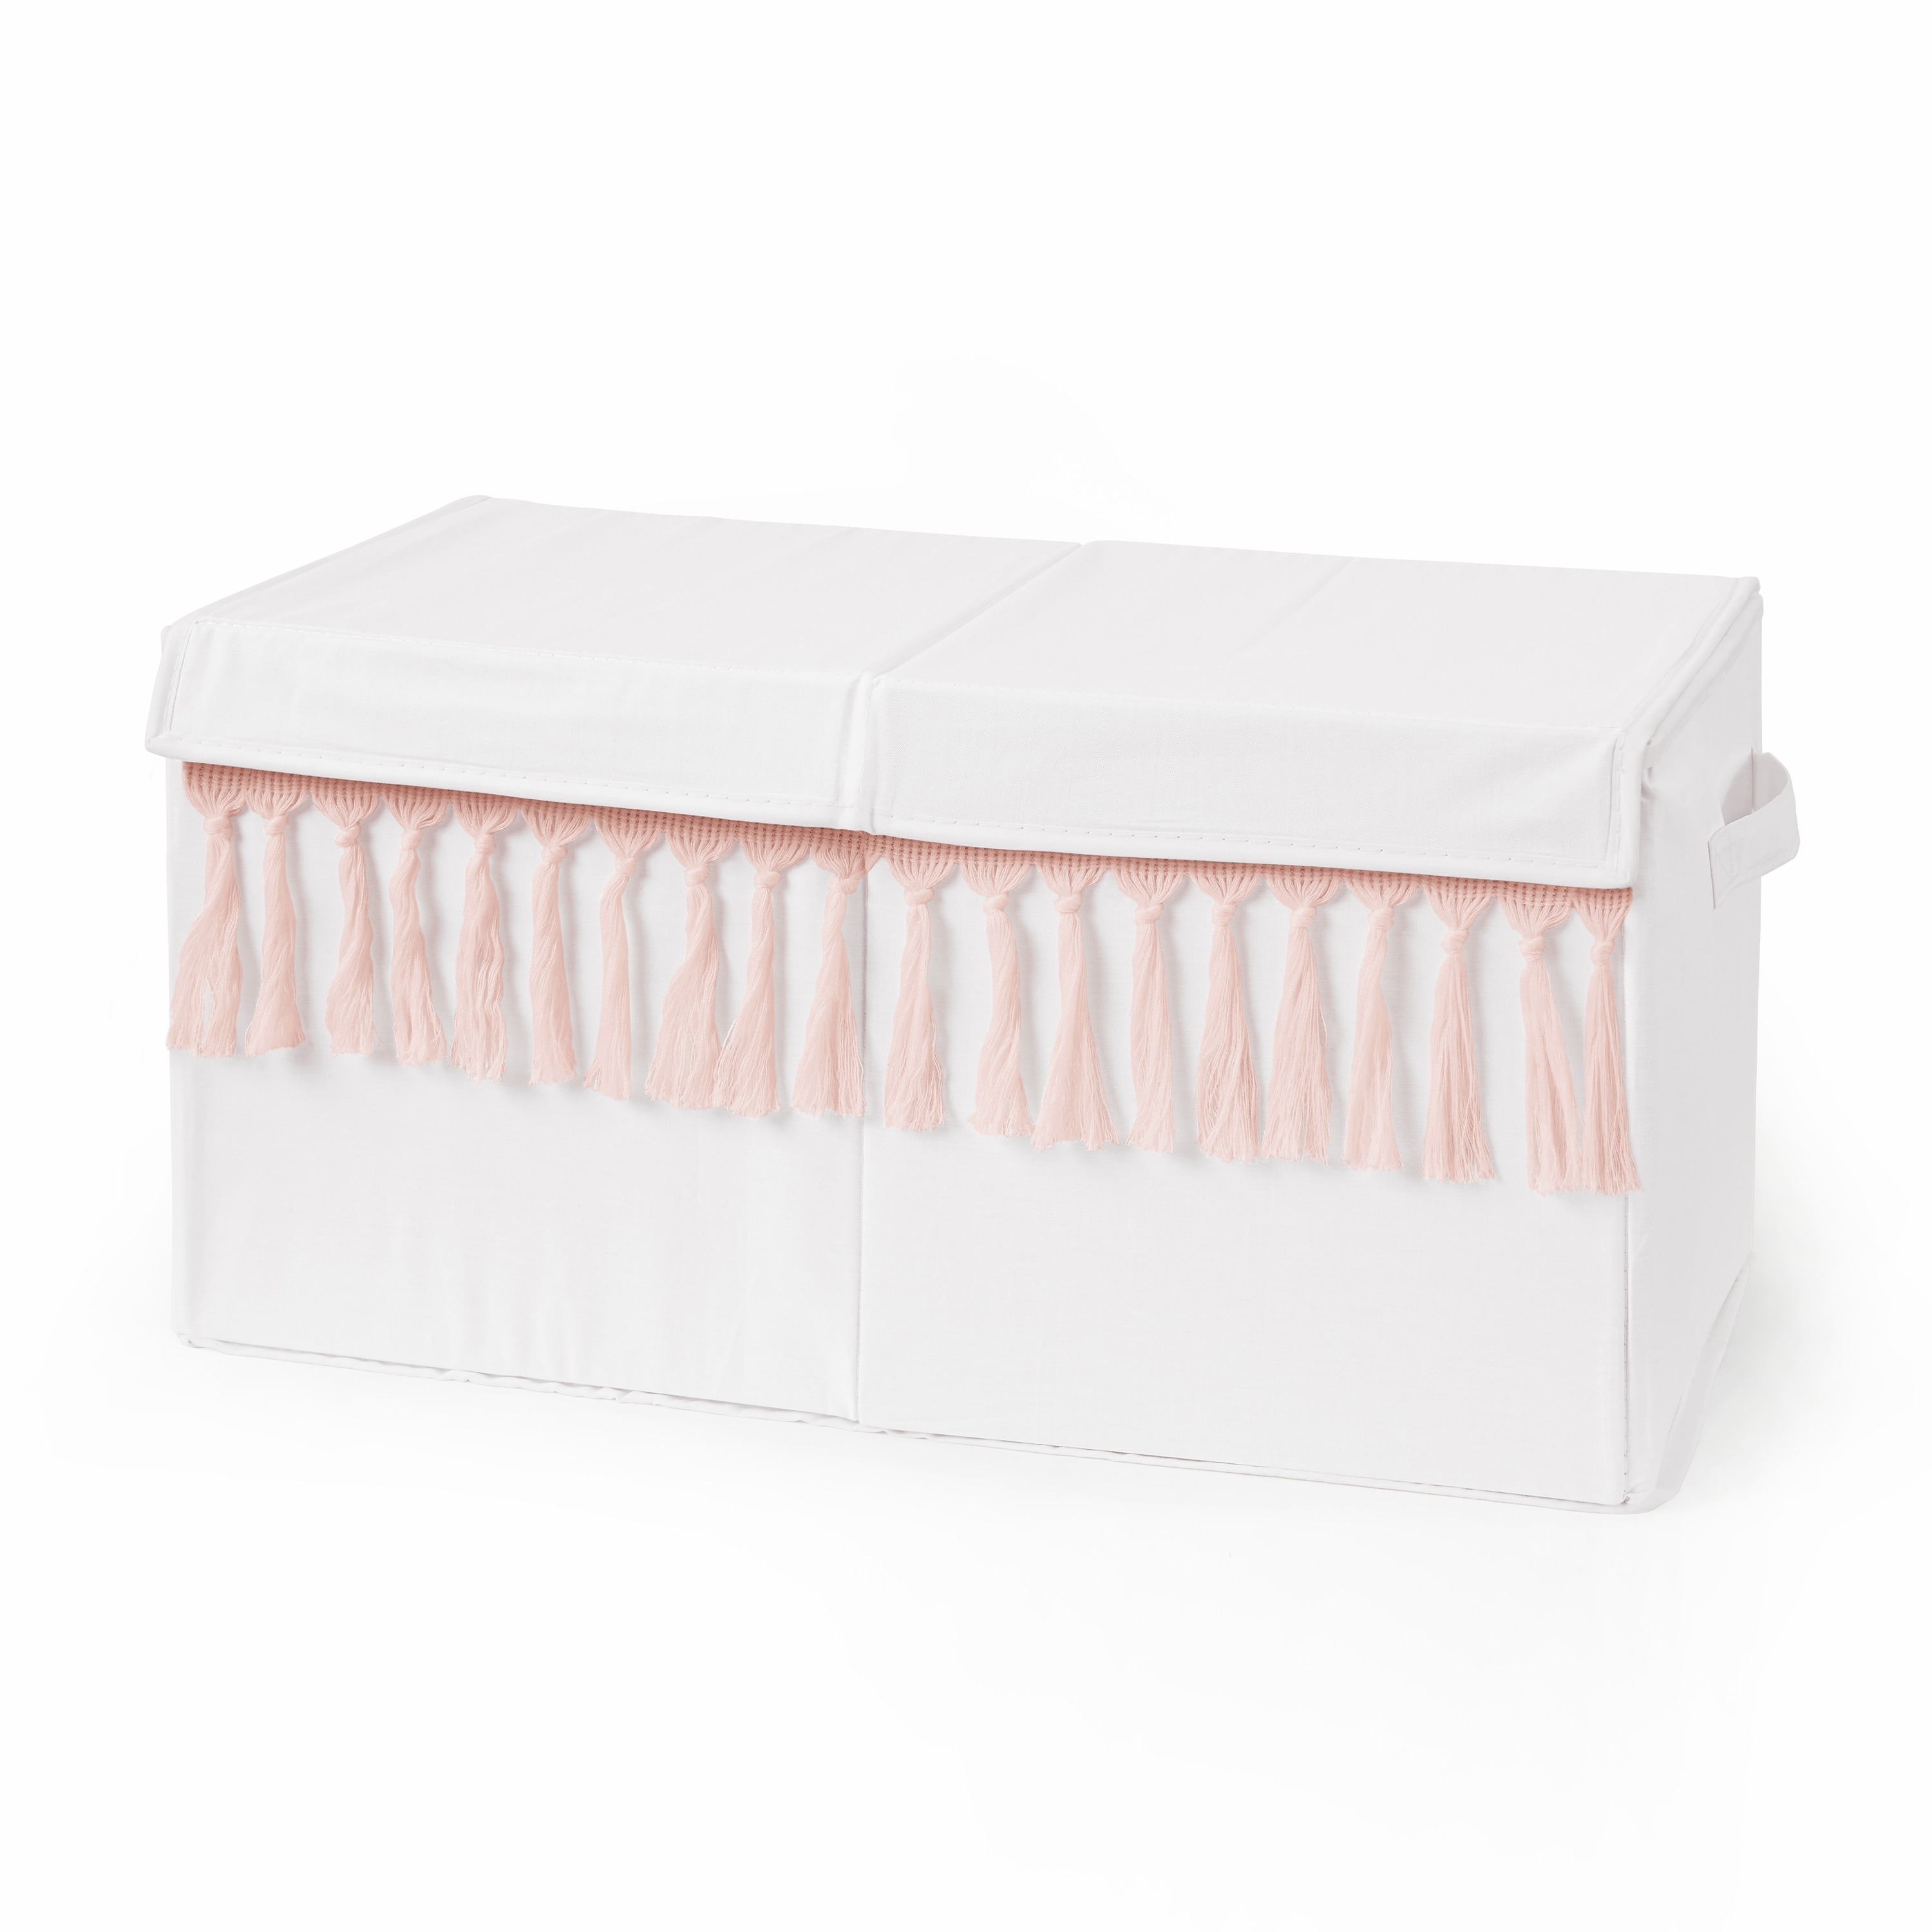 Badger Basket Kid's Storage Bench with Cushion and 3 Bins in White/Pink